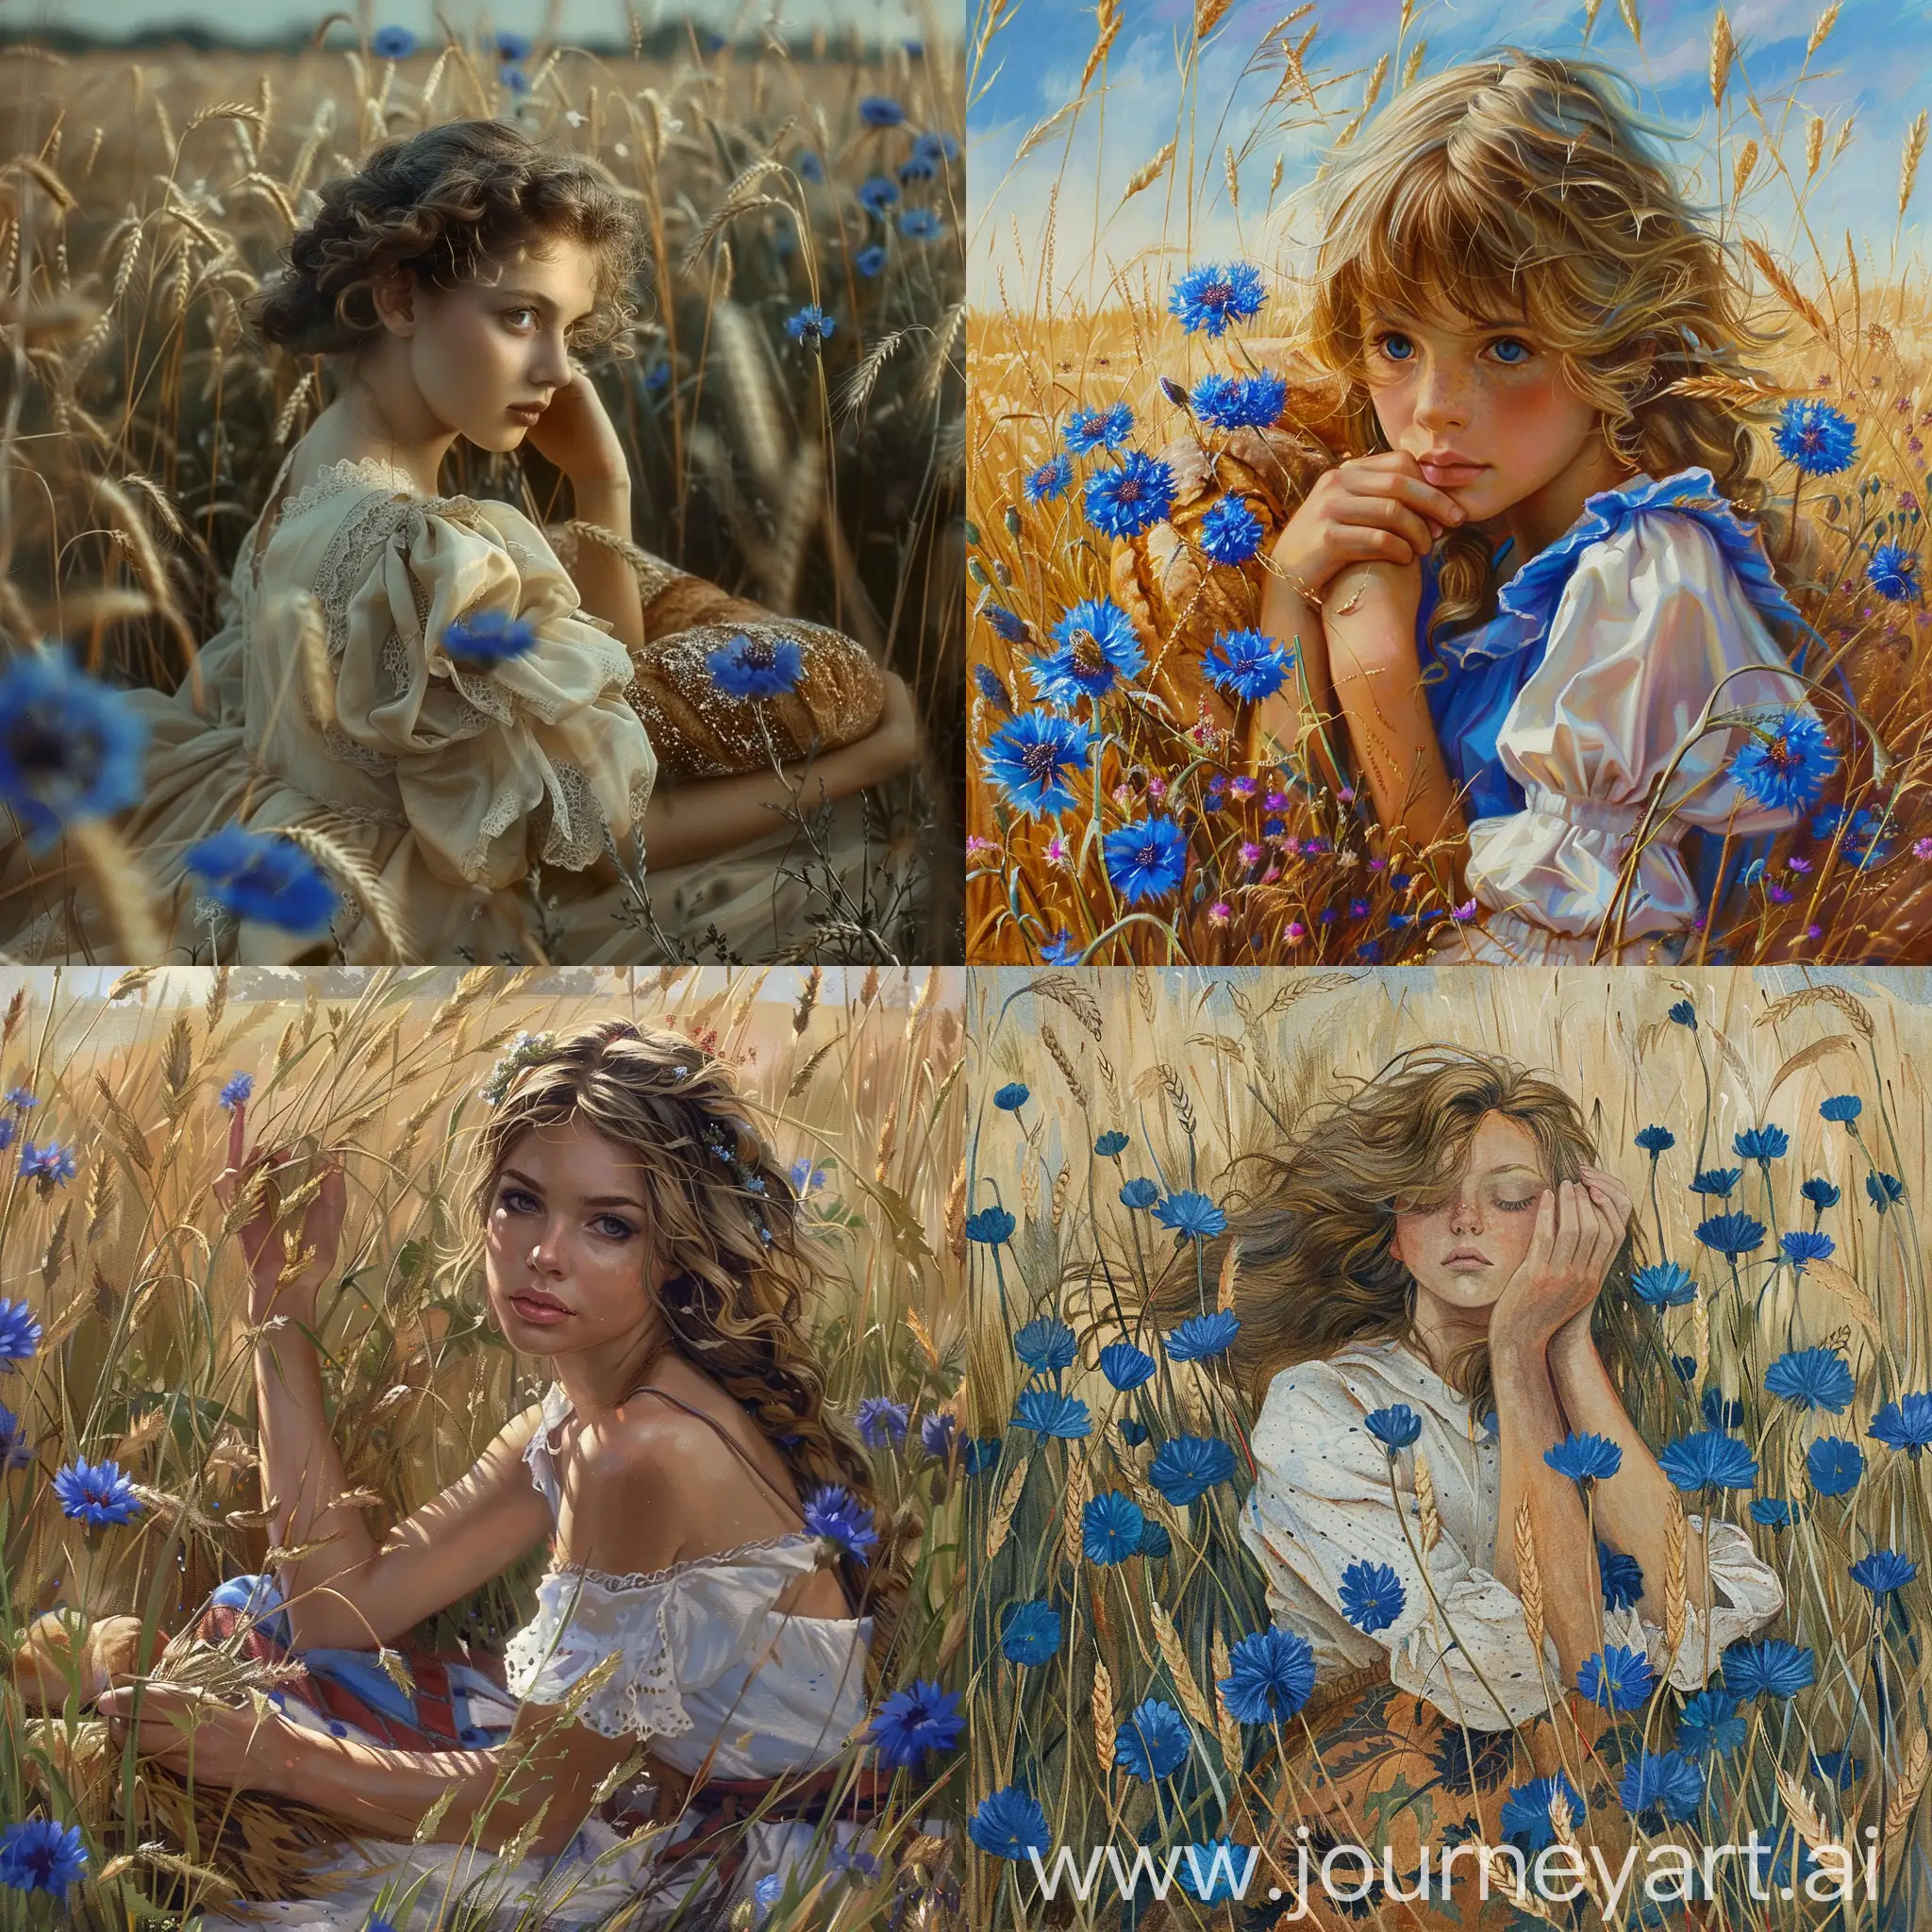 Girl-in-Reed-Bed-Holding-Baguette-with-Cornflowers-and-Field-Plants